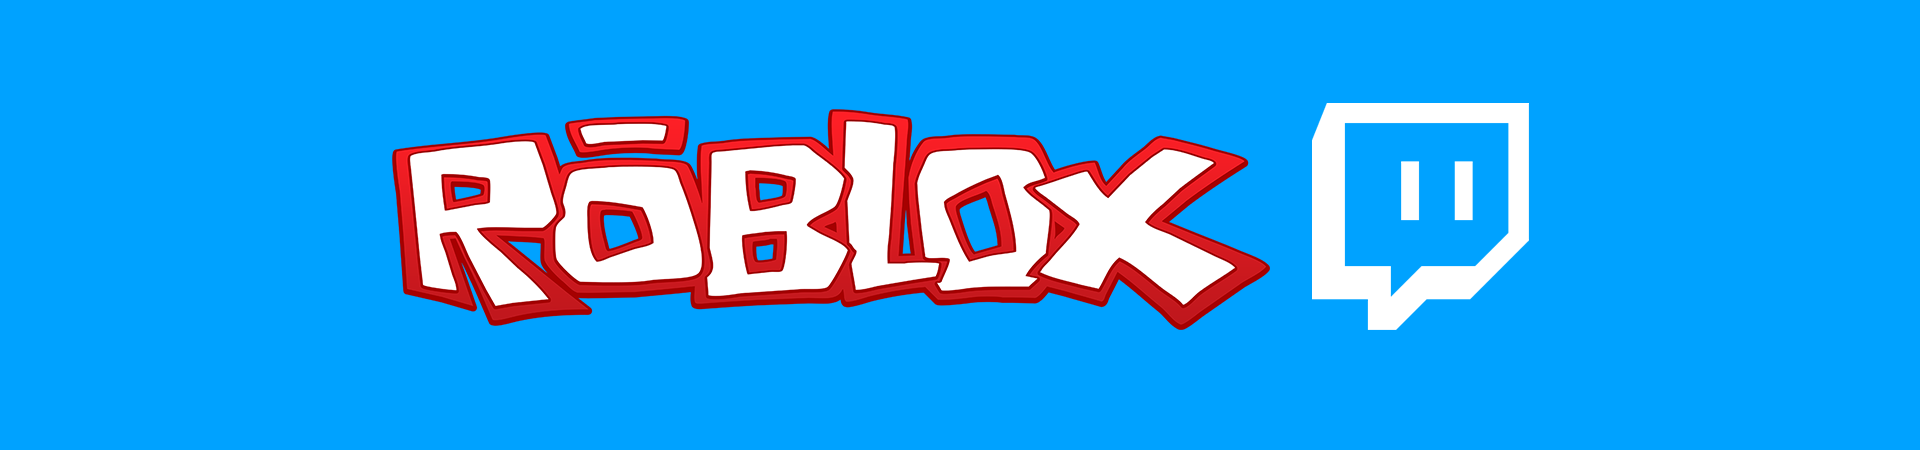 How To Stream Roblox On Twitch 2015 Edition Roblox Blog